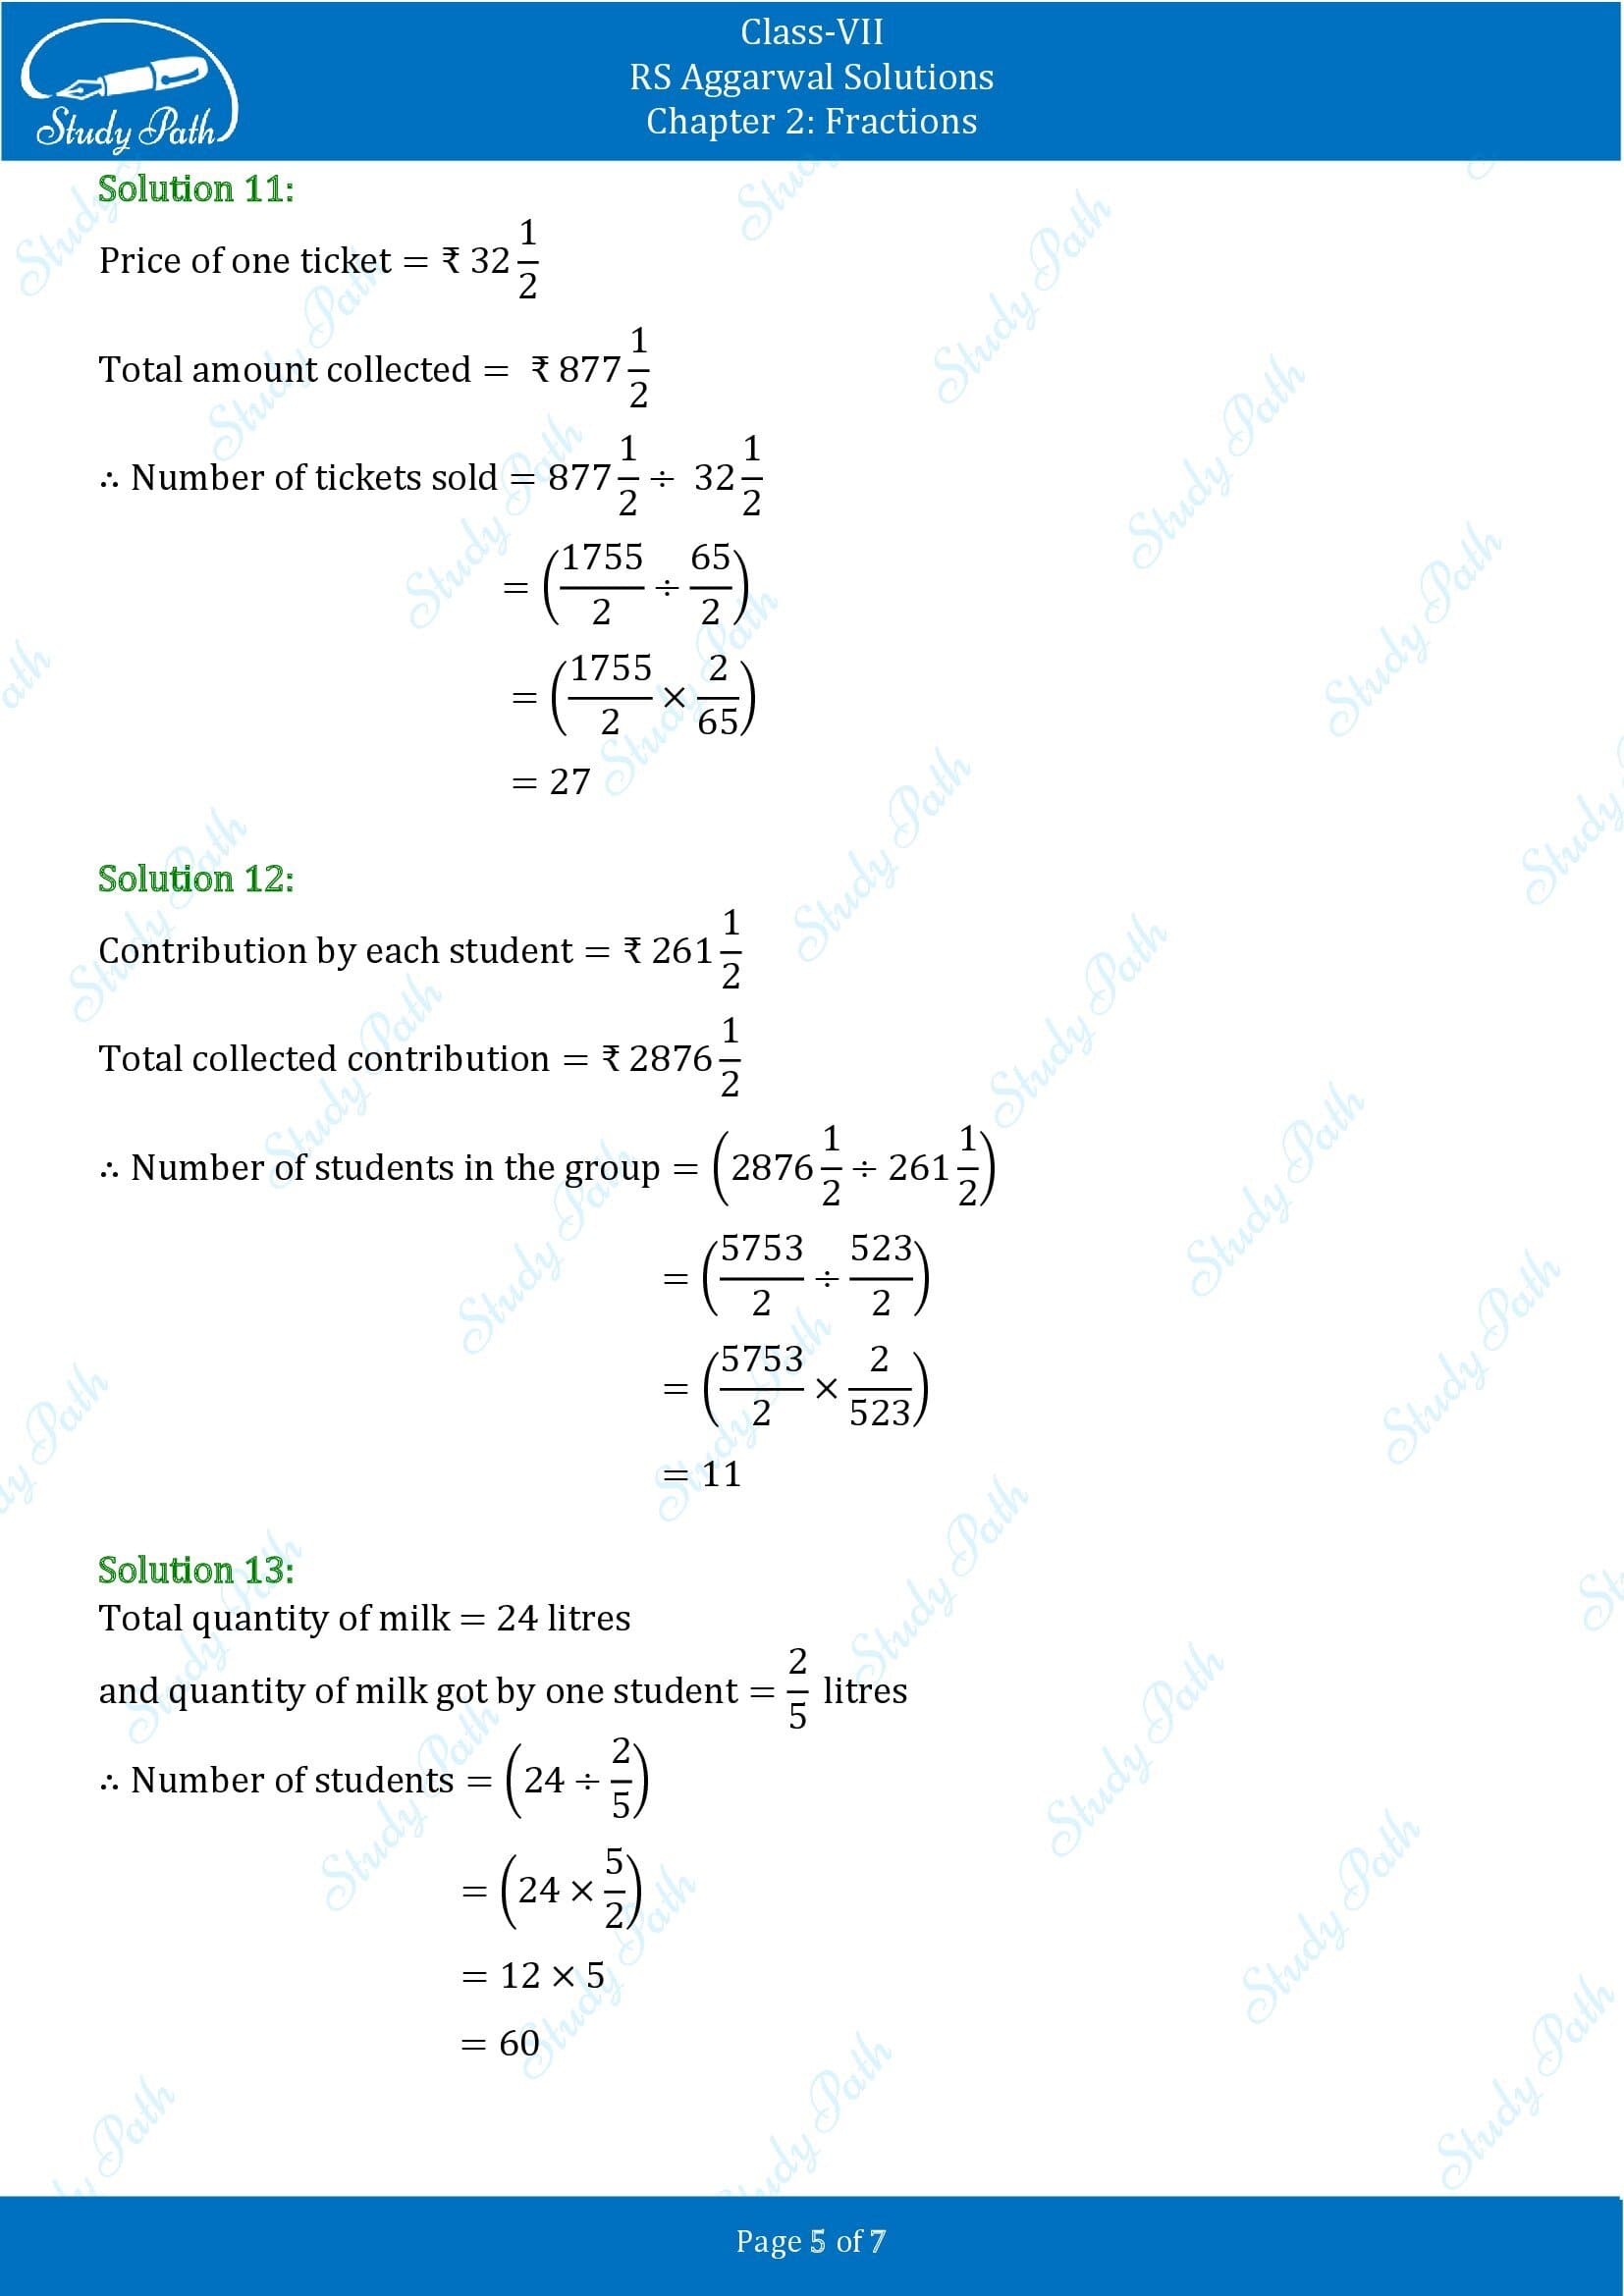 RS Aggarwal Solutions Class 7 Chapter 2 Fractions Exercise 2C 00005